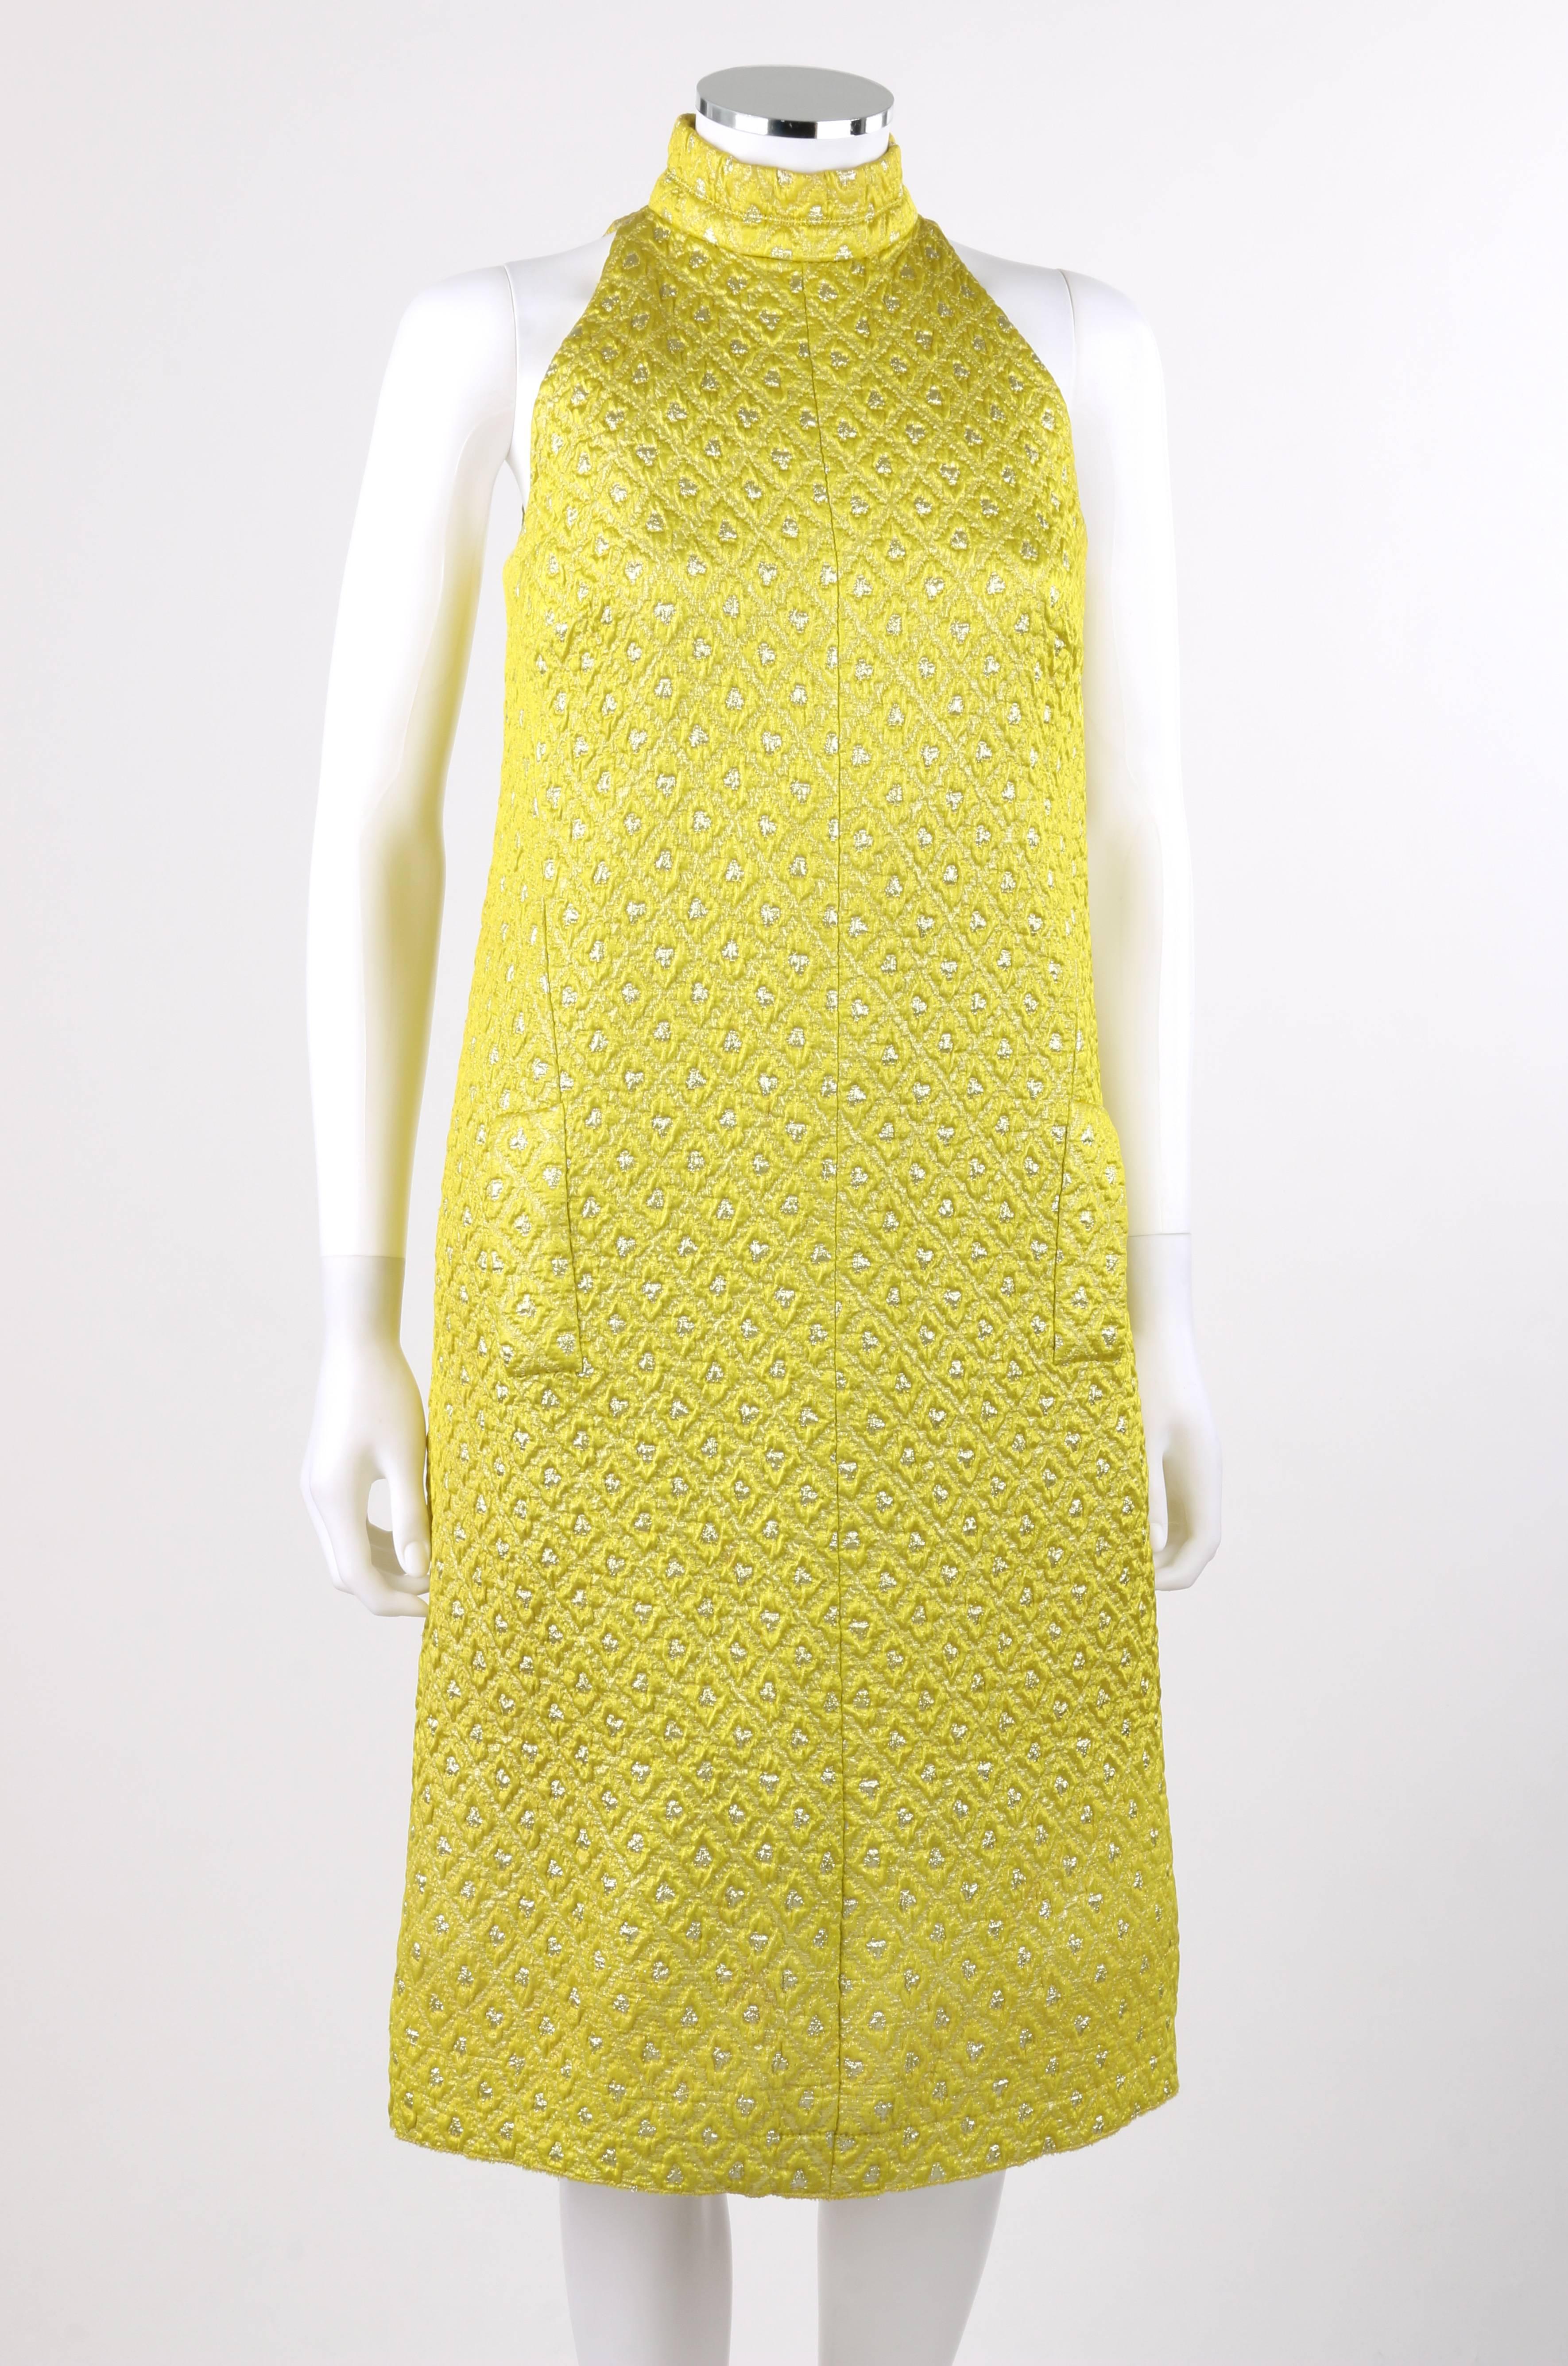 Vintage Jean Patou late 1960's yellow and silver diamond brocade halter cocktail dress. Yellow and silver lurex diamond patterned brocade. Mandarin collar. Halter cut bodice. Sleeveless shift style. Center back zipper closure with two hook and eye